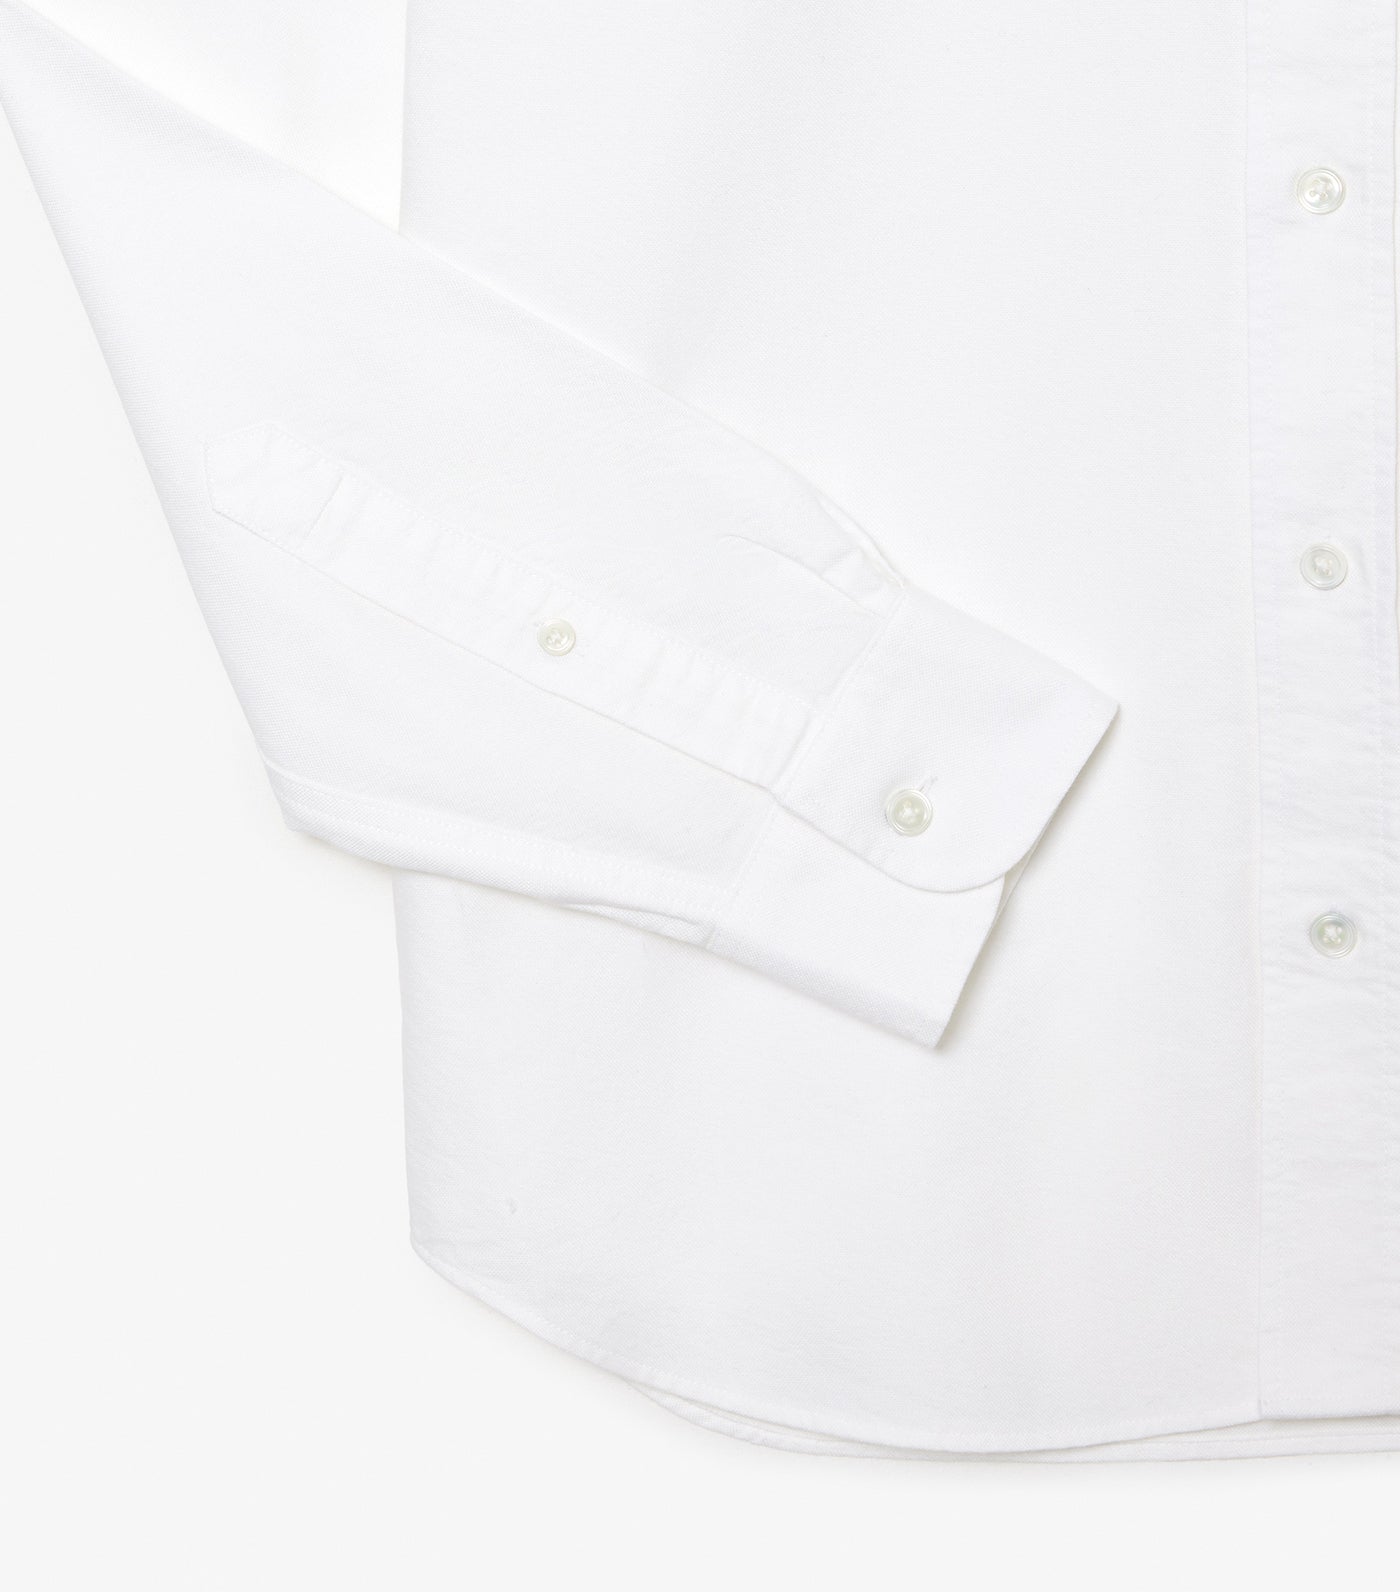 Long Sleeved Oxford Cotton Shirt White